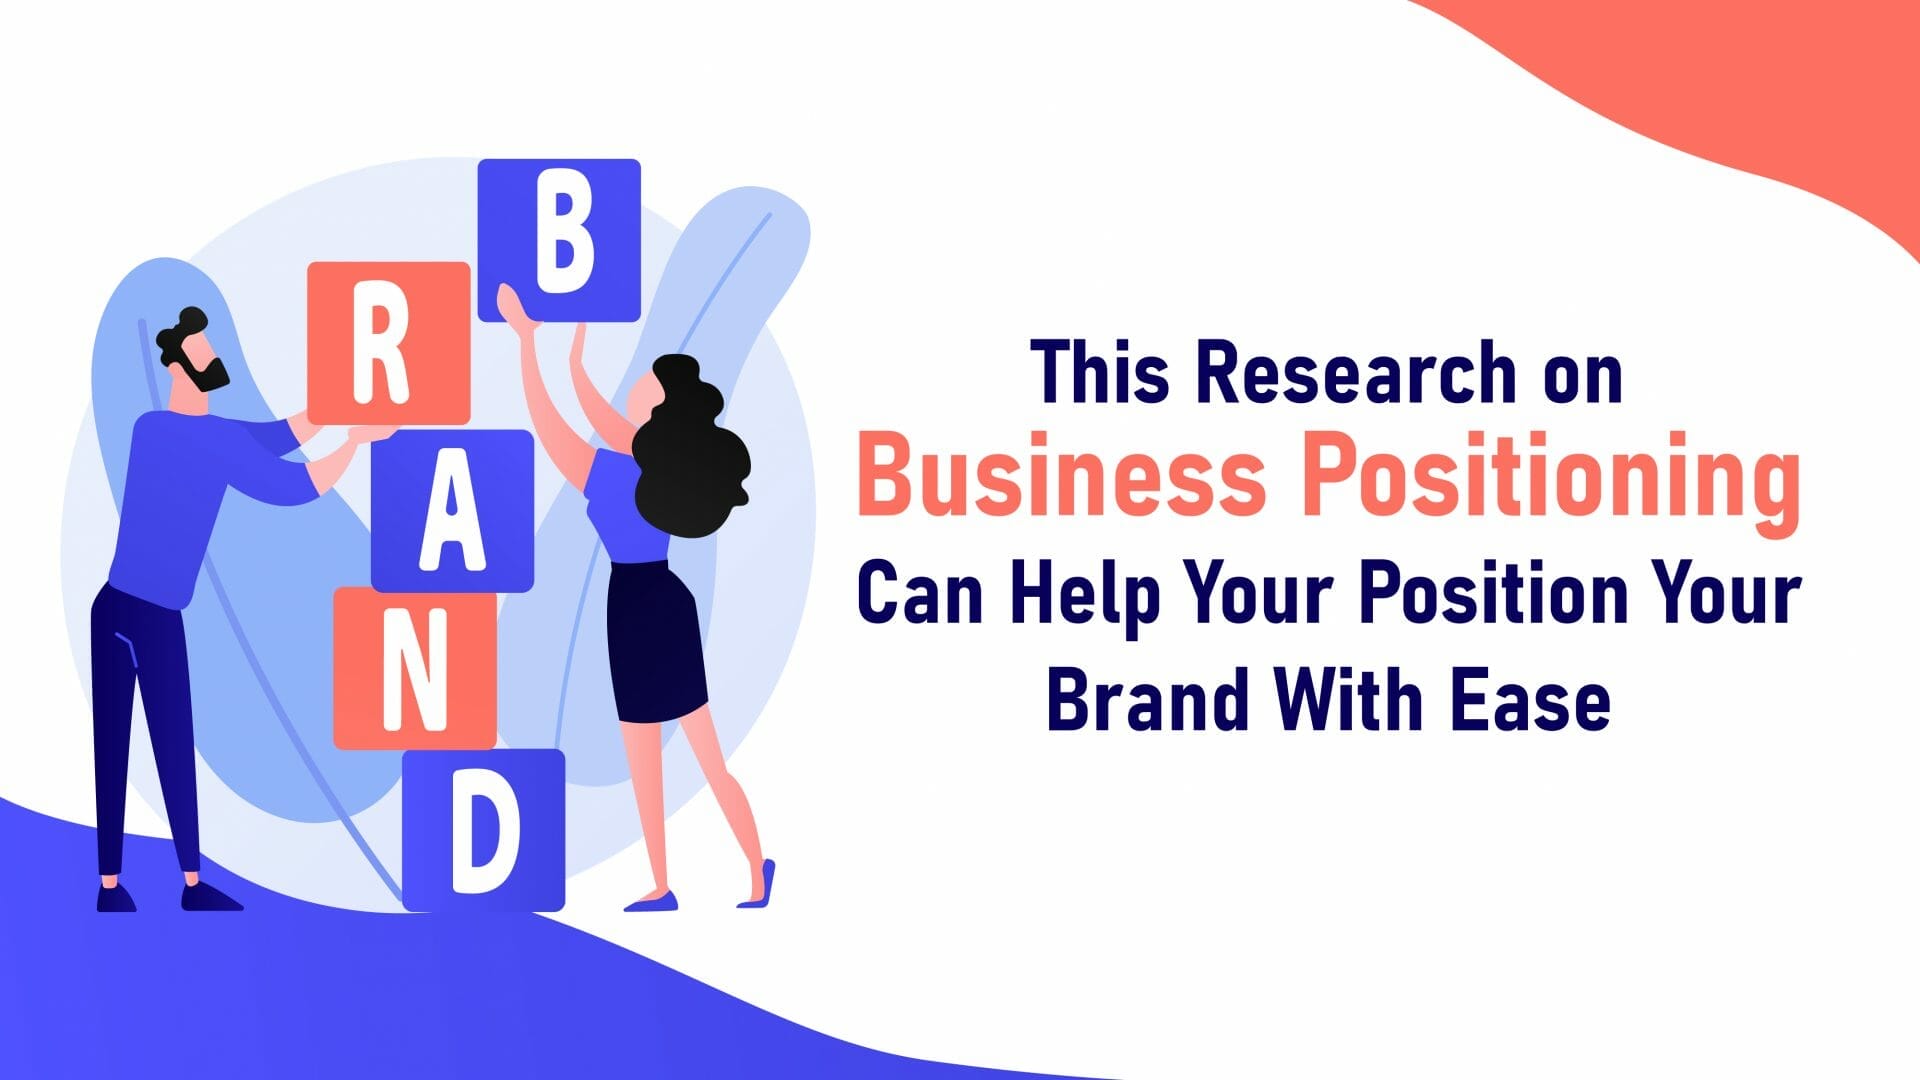 Research on Business Positioning Can Help Your understand how to Position a Brand With Ease.